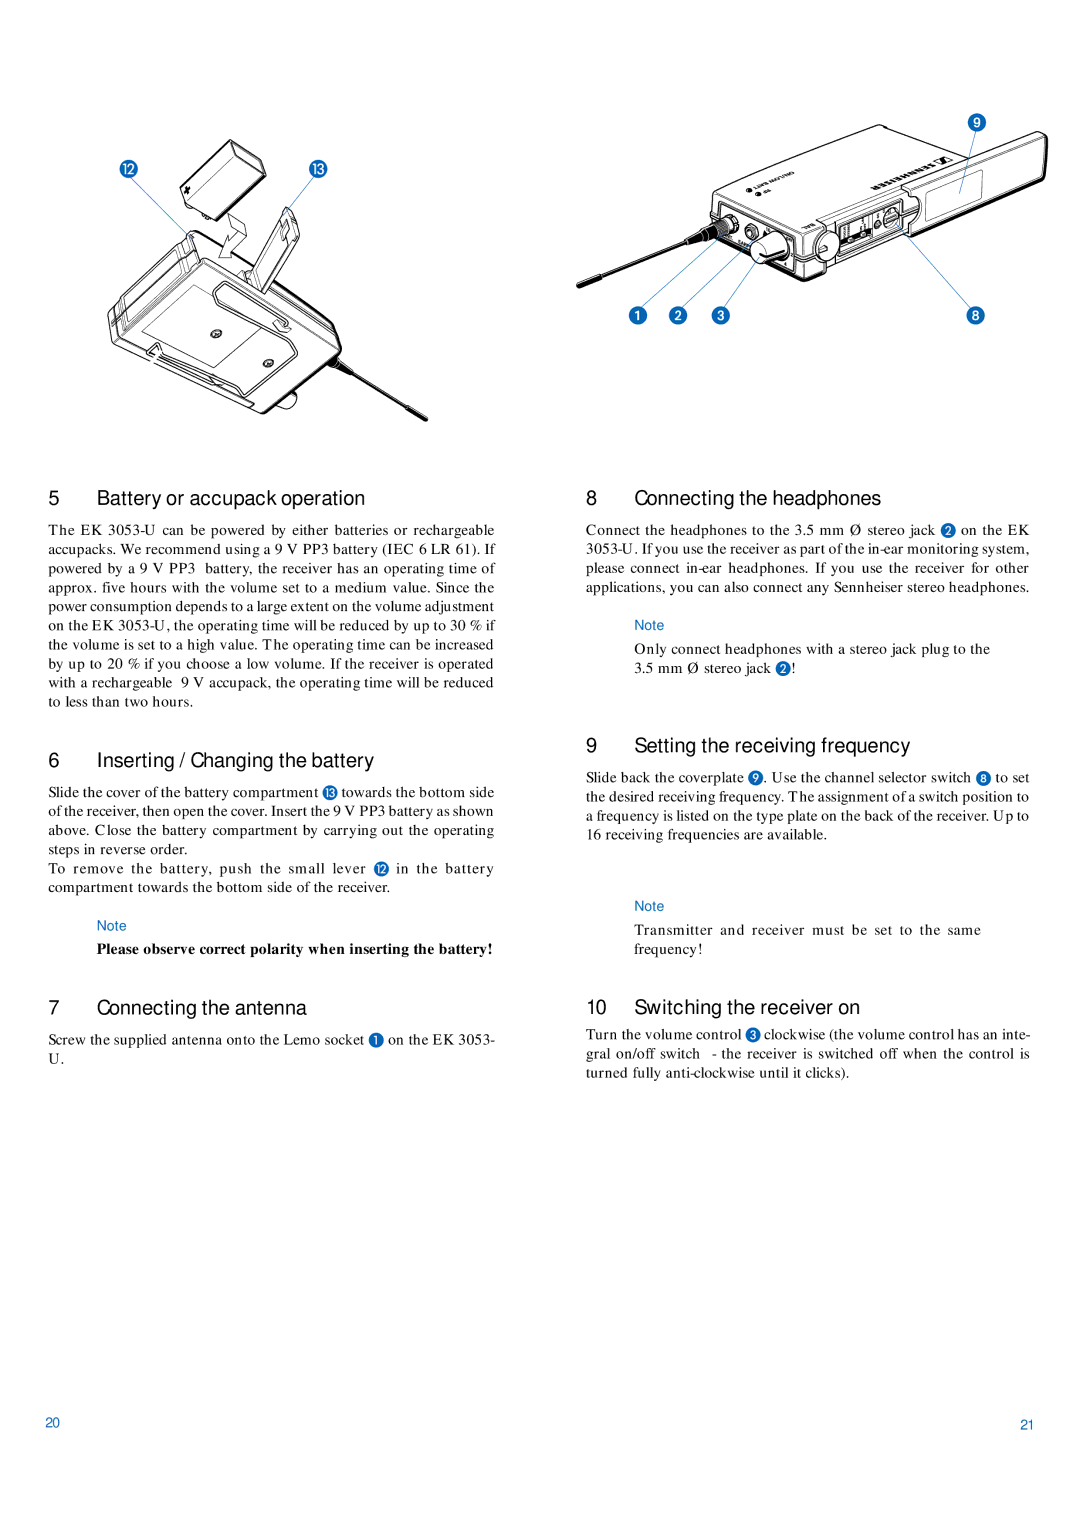 Sennheiser EK 3053-U manual Battery or accupack operation, Inserting / Changing the battery, Connecting the antenna 